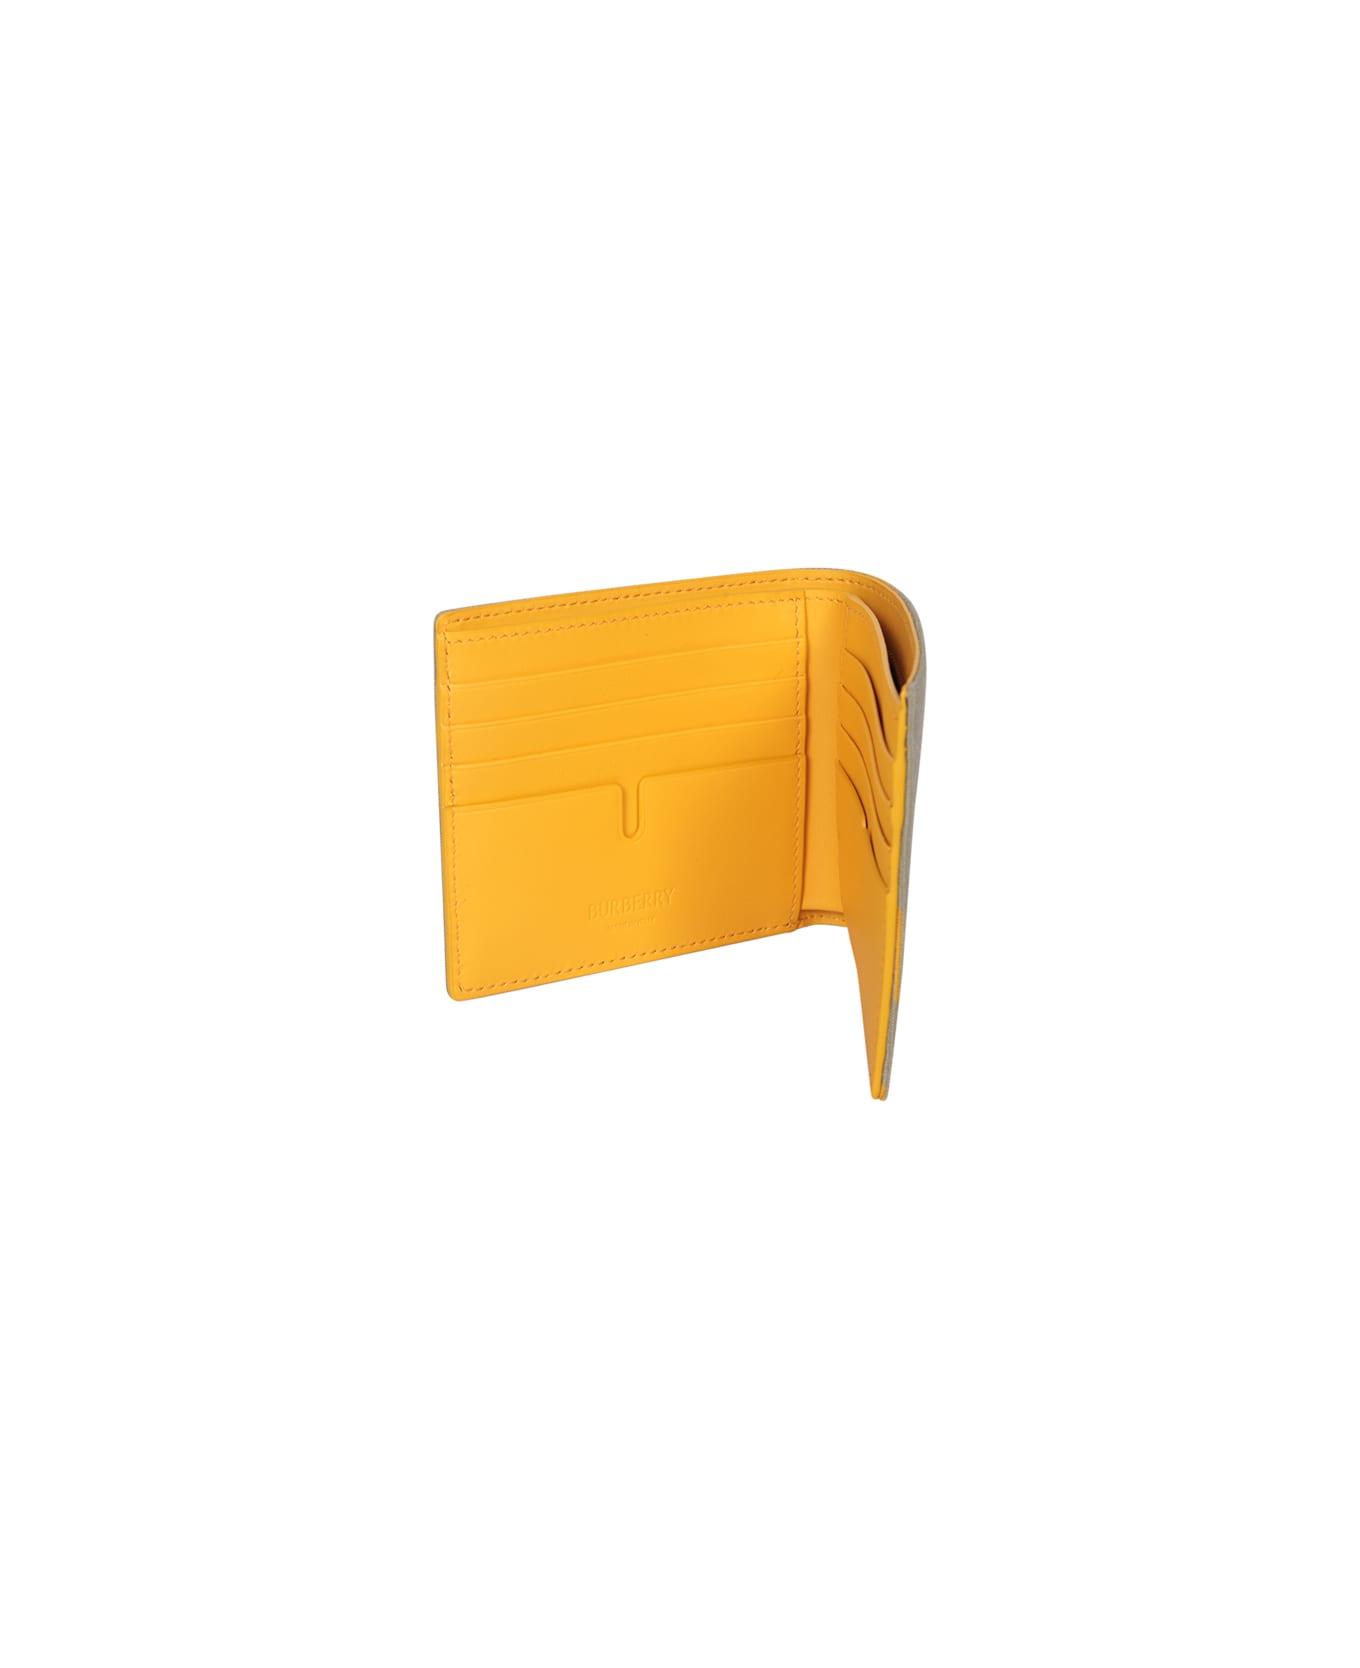 Burberry Wool And Leather Wallet - Yellow 財布